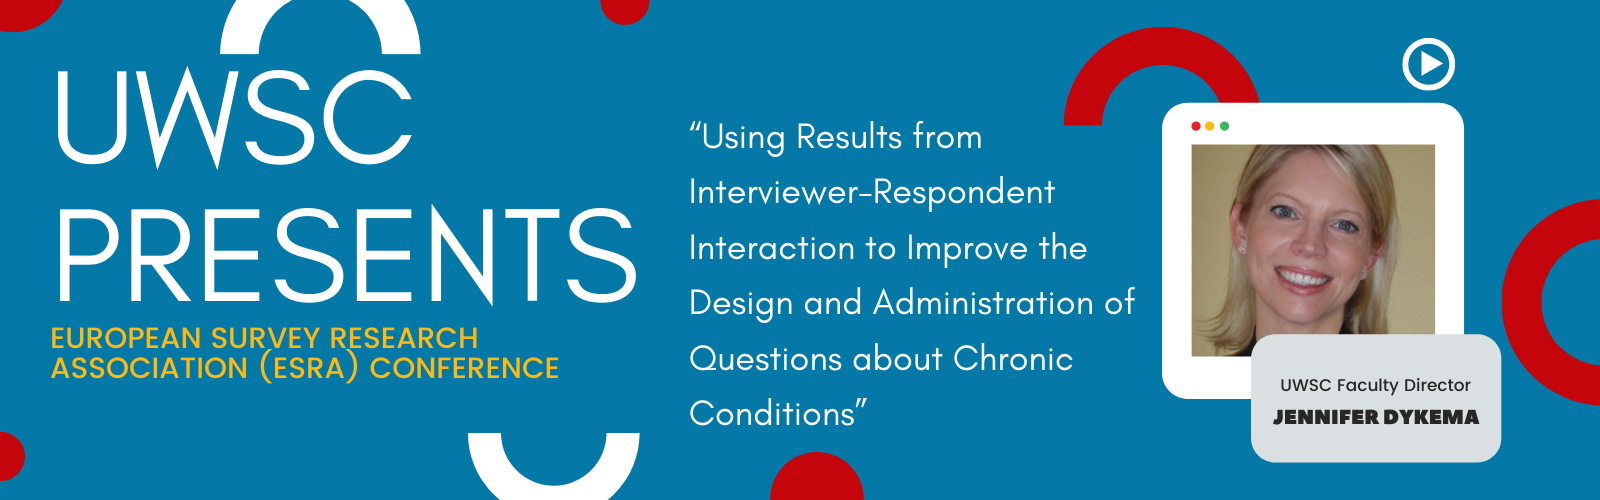 UWSC Faculty Director Jennifer Dykema presents at the European Survey Research (ESRA) Conference "Using Results from Interviewer-Respondent Interaction to Improve the Design and Administration of Questions about Chronic Conditions"